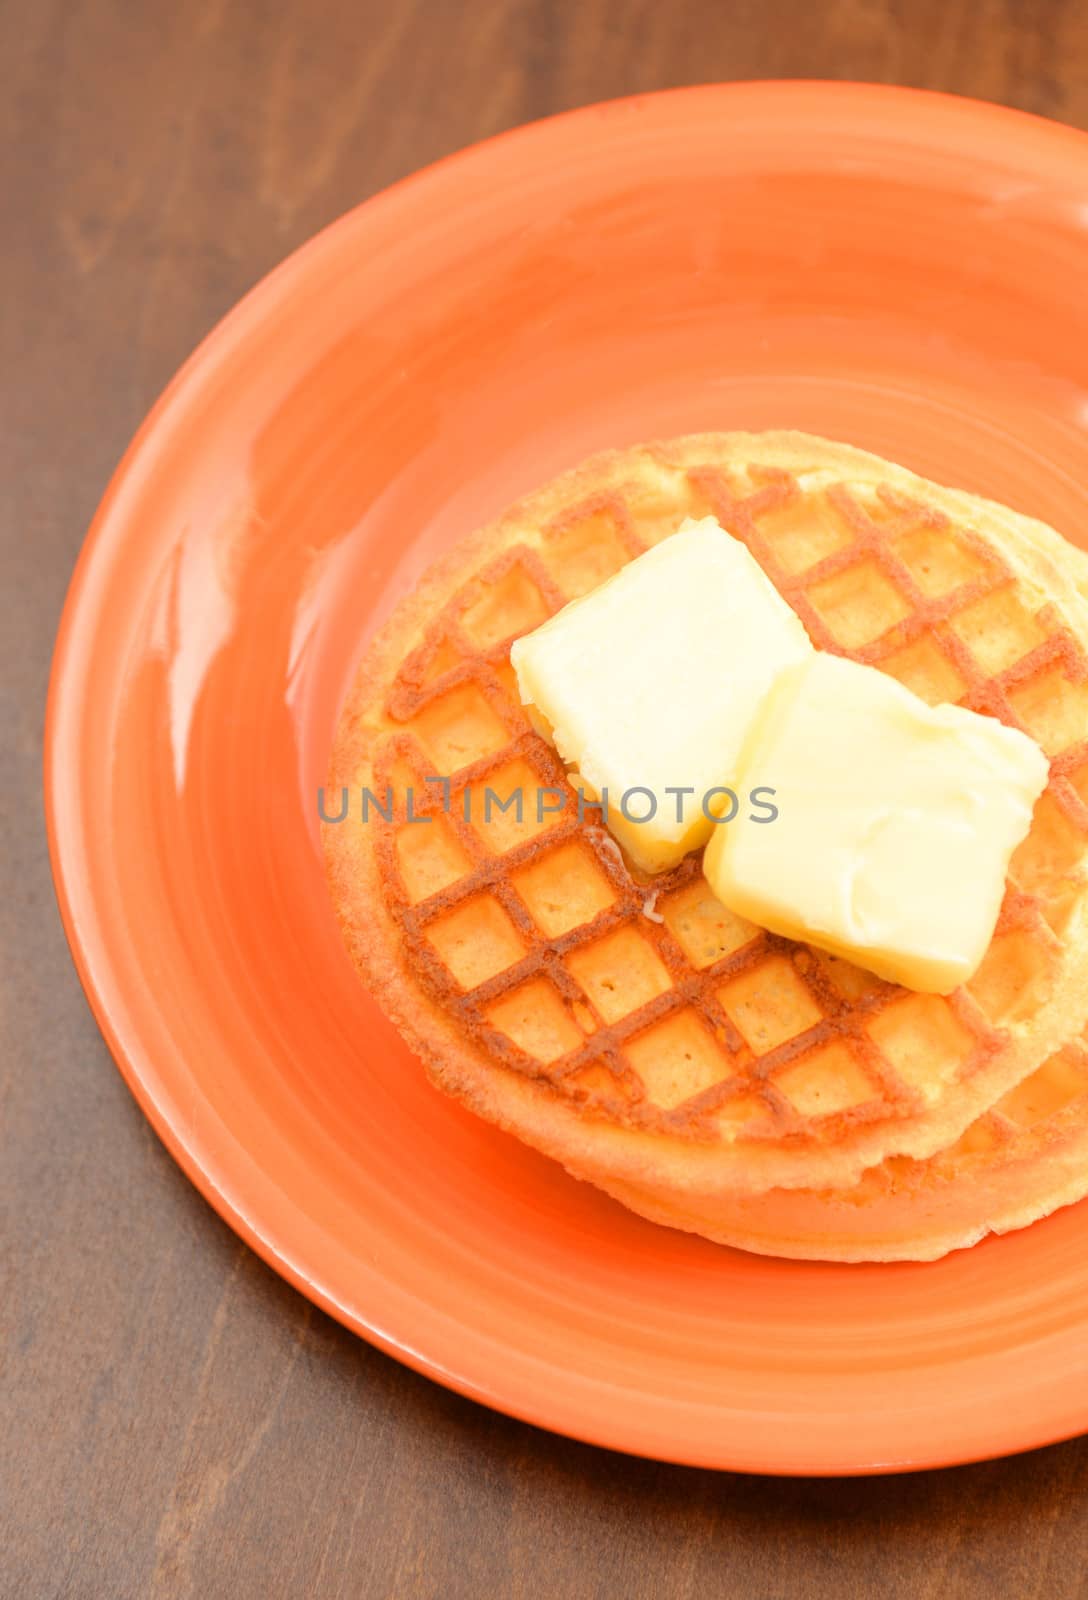 two classic waffles with butter on orange plate and wood